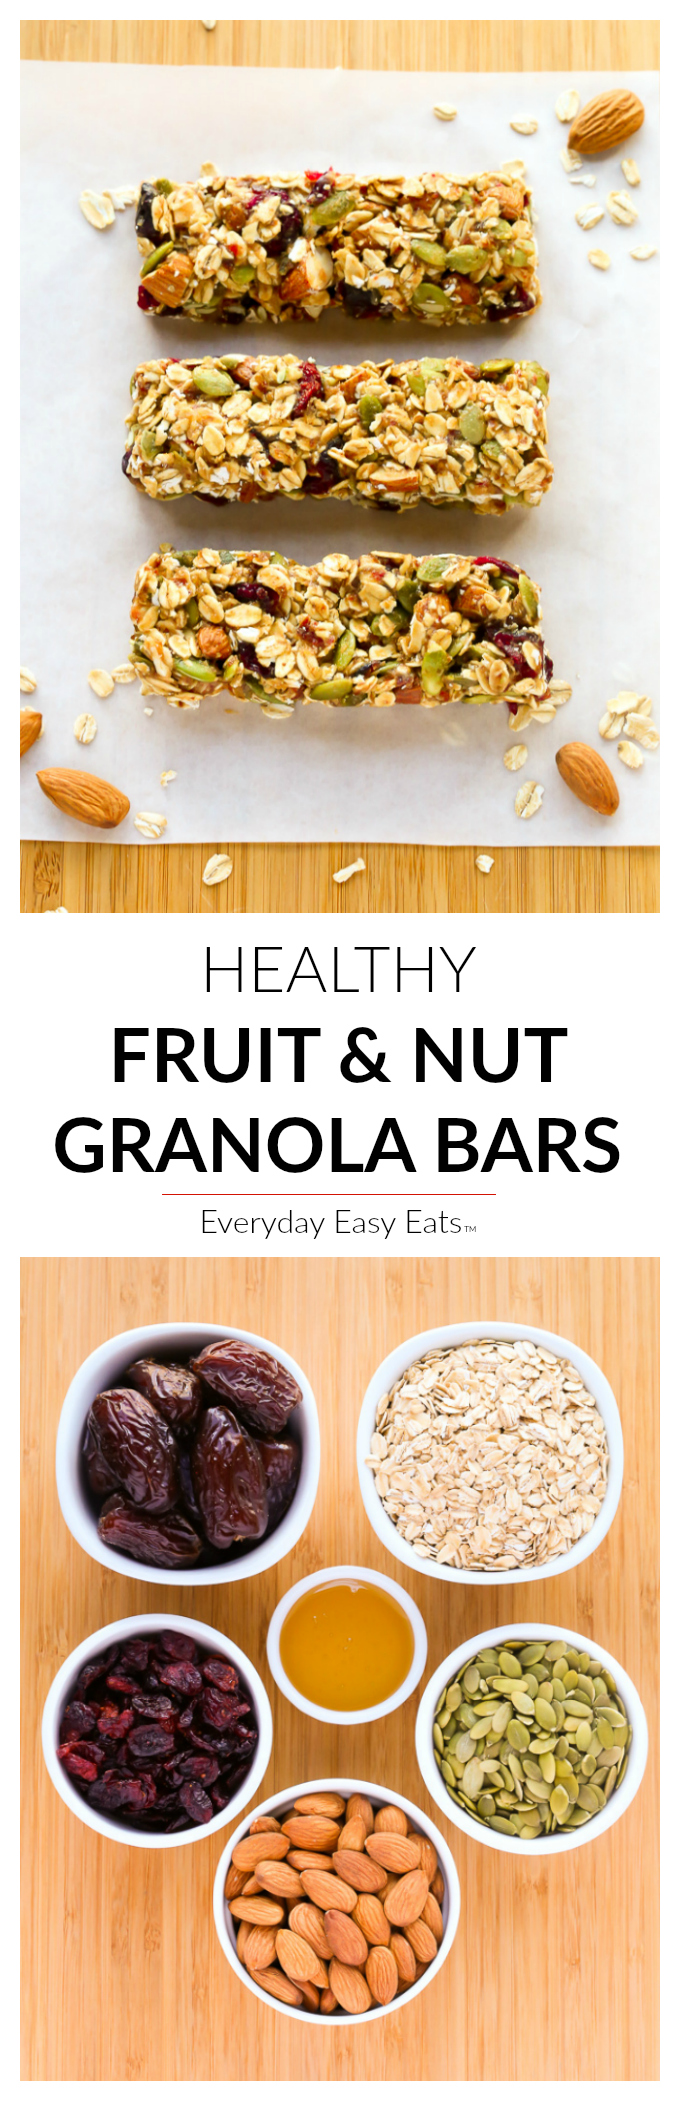 No-bake, 6-ingredient, Healthy Fruit and Nut Granola Bars! | Recipe at EverydayEasyEats.com